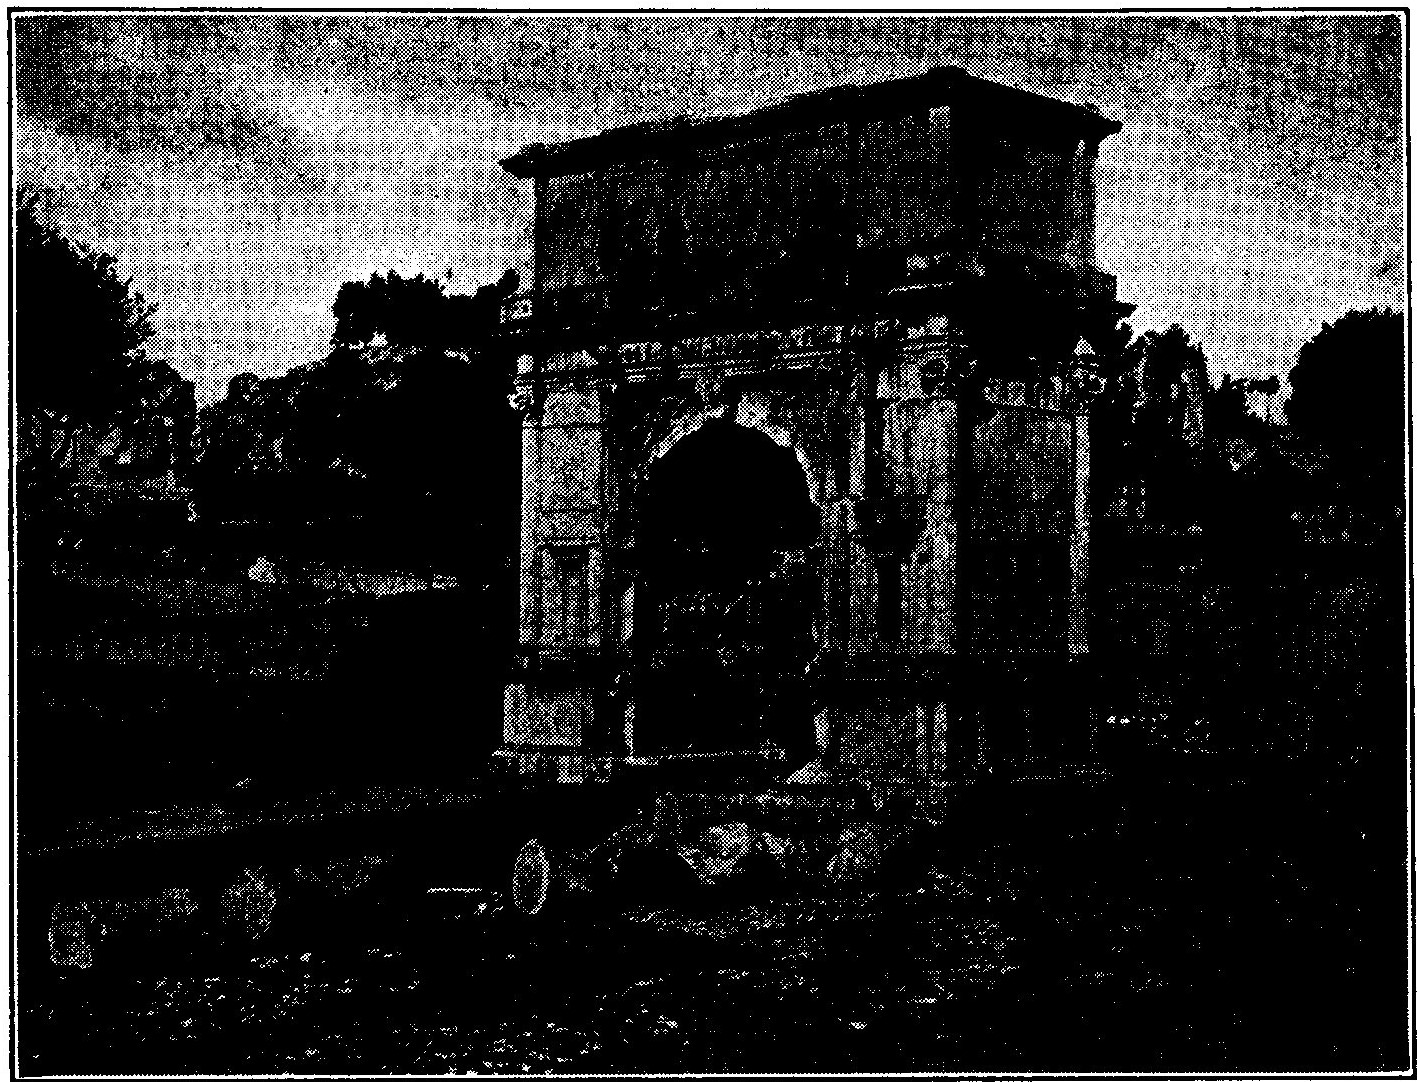 TRIUMPHAL ARCH OF TITUS Erected chiefly to commemorate his victory over the Jews and his conquest of Jerusalem. The relief reproduced on page 241 can just be traced on the inside wall. We have notice of 21 triumphal arches. This is one of the five still existing.